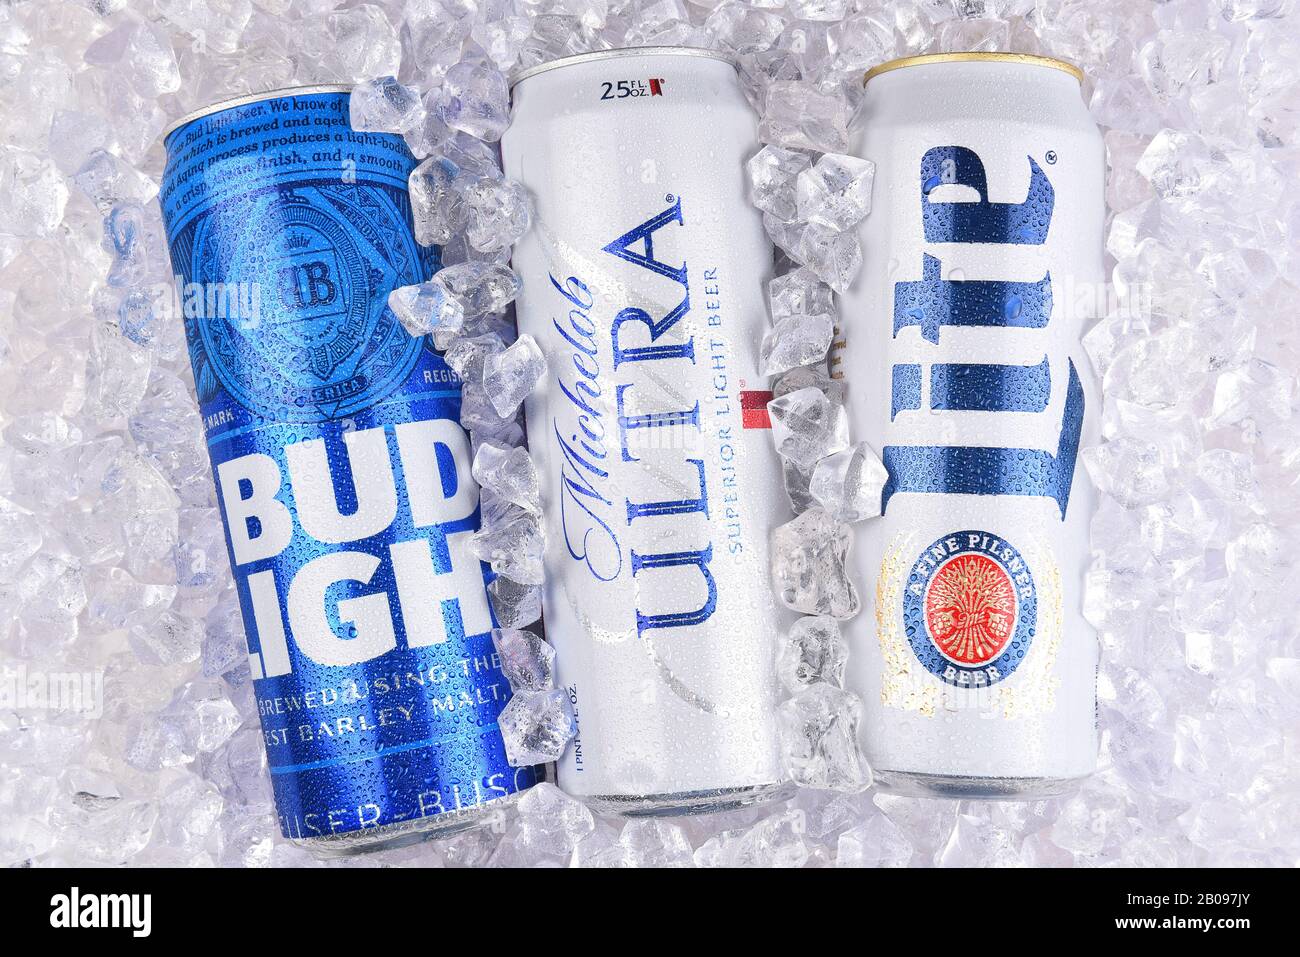 IRVINE, CALIFORNIA - MARCH 29, 2018: Three of the most popular Light beers in a bed of ice. King cans of Bud Light, Michelob Ultra, and Miller Lite. Stock Photo